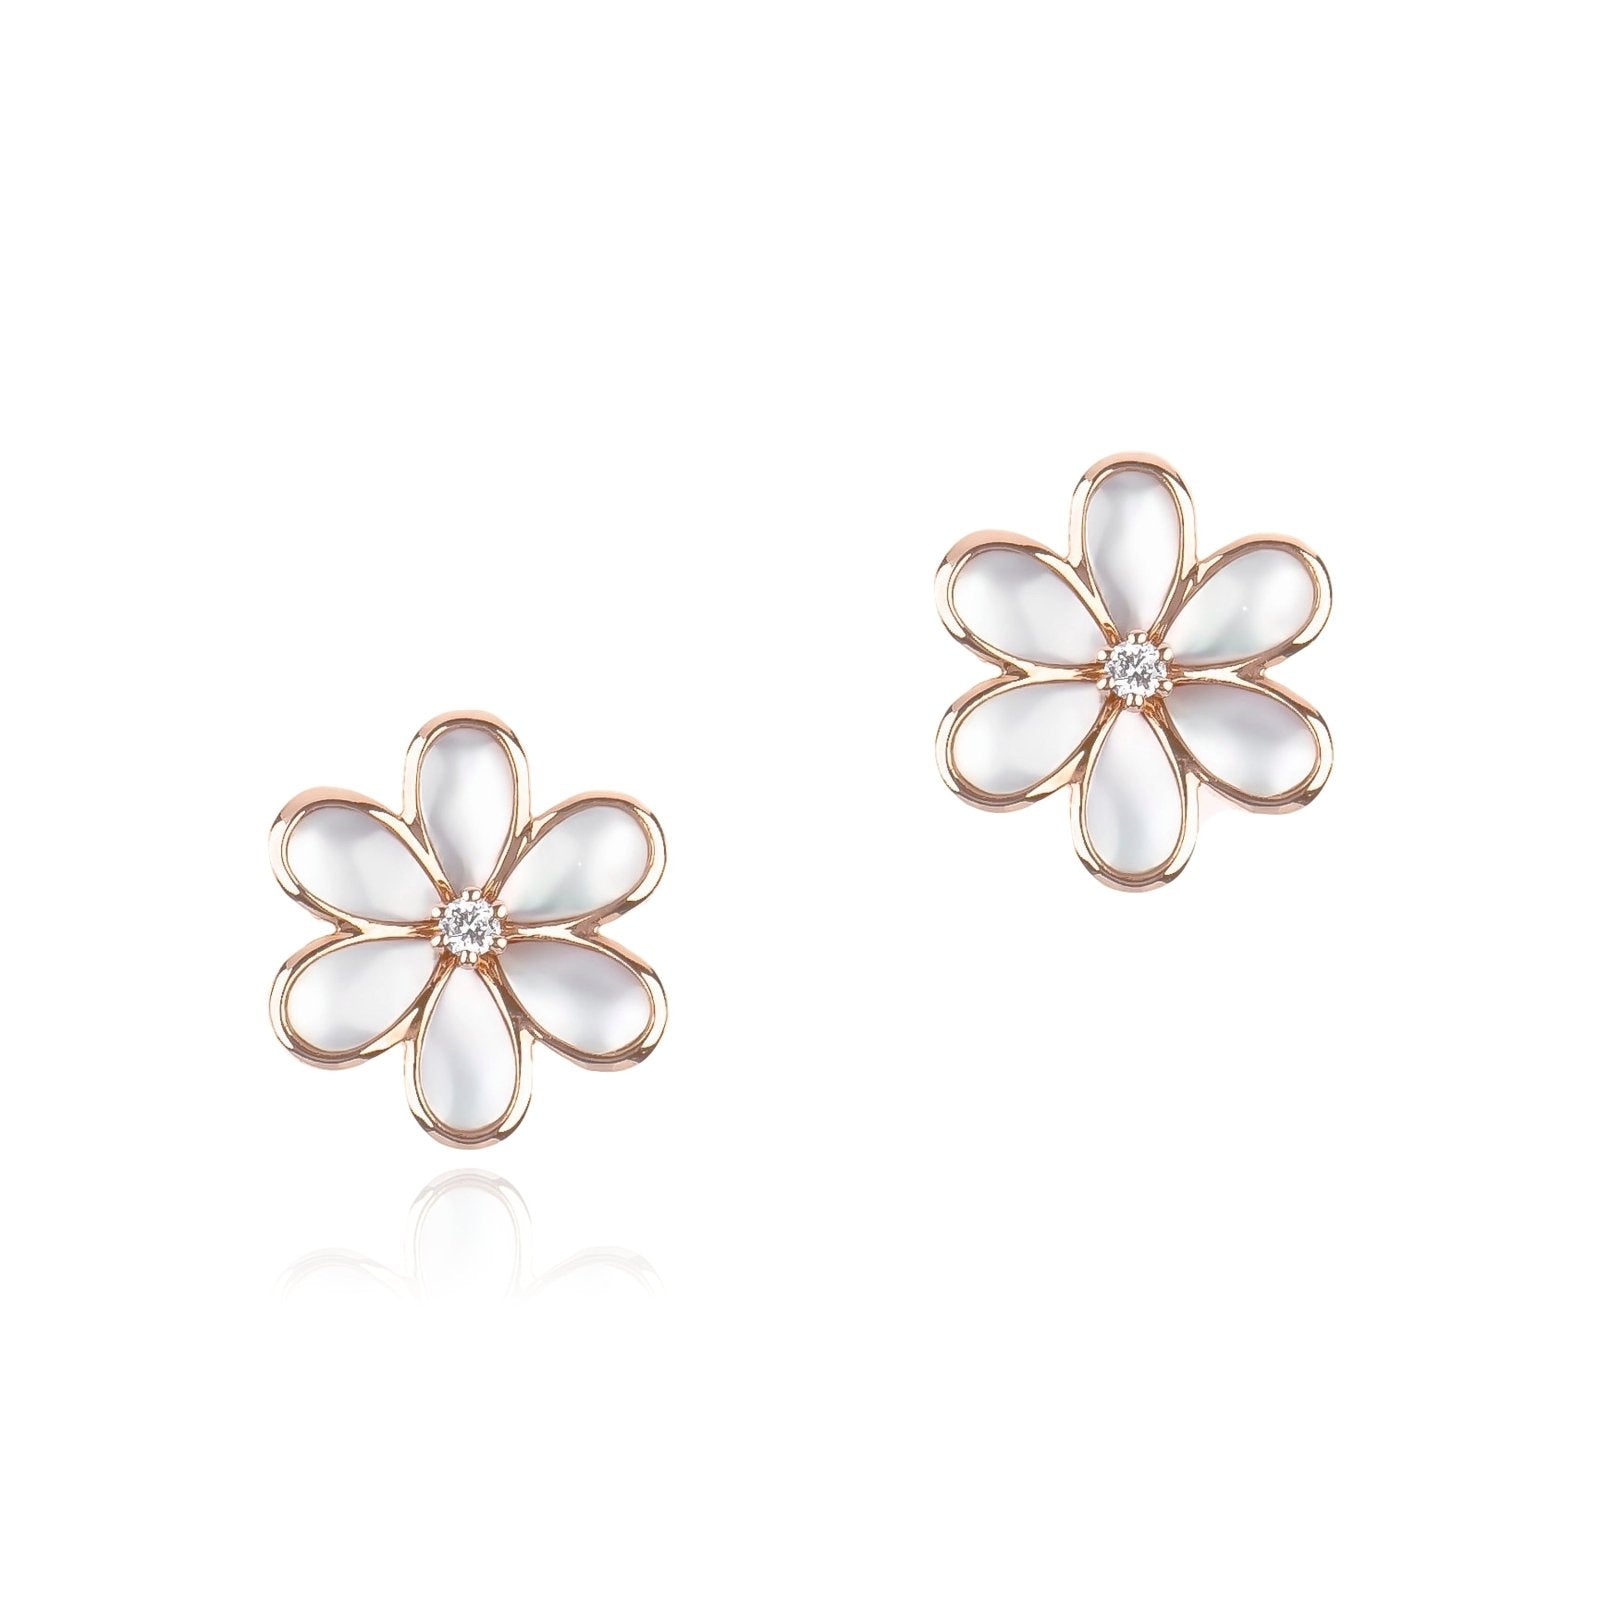 Mother of Pearl and Diamond Flower Earrings Earrings Estella Collection 17216 14k Birthstone Birthstone Earrings #tag4# #tag5# #tag6# #tag7# #tag8# #tag9# #tag10# 14K Rose Gold